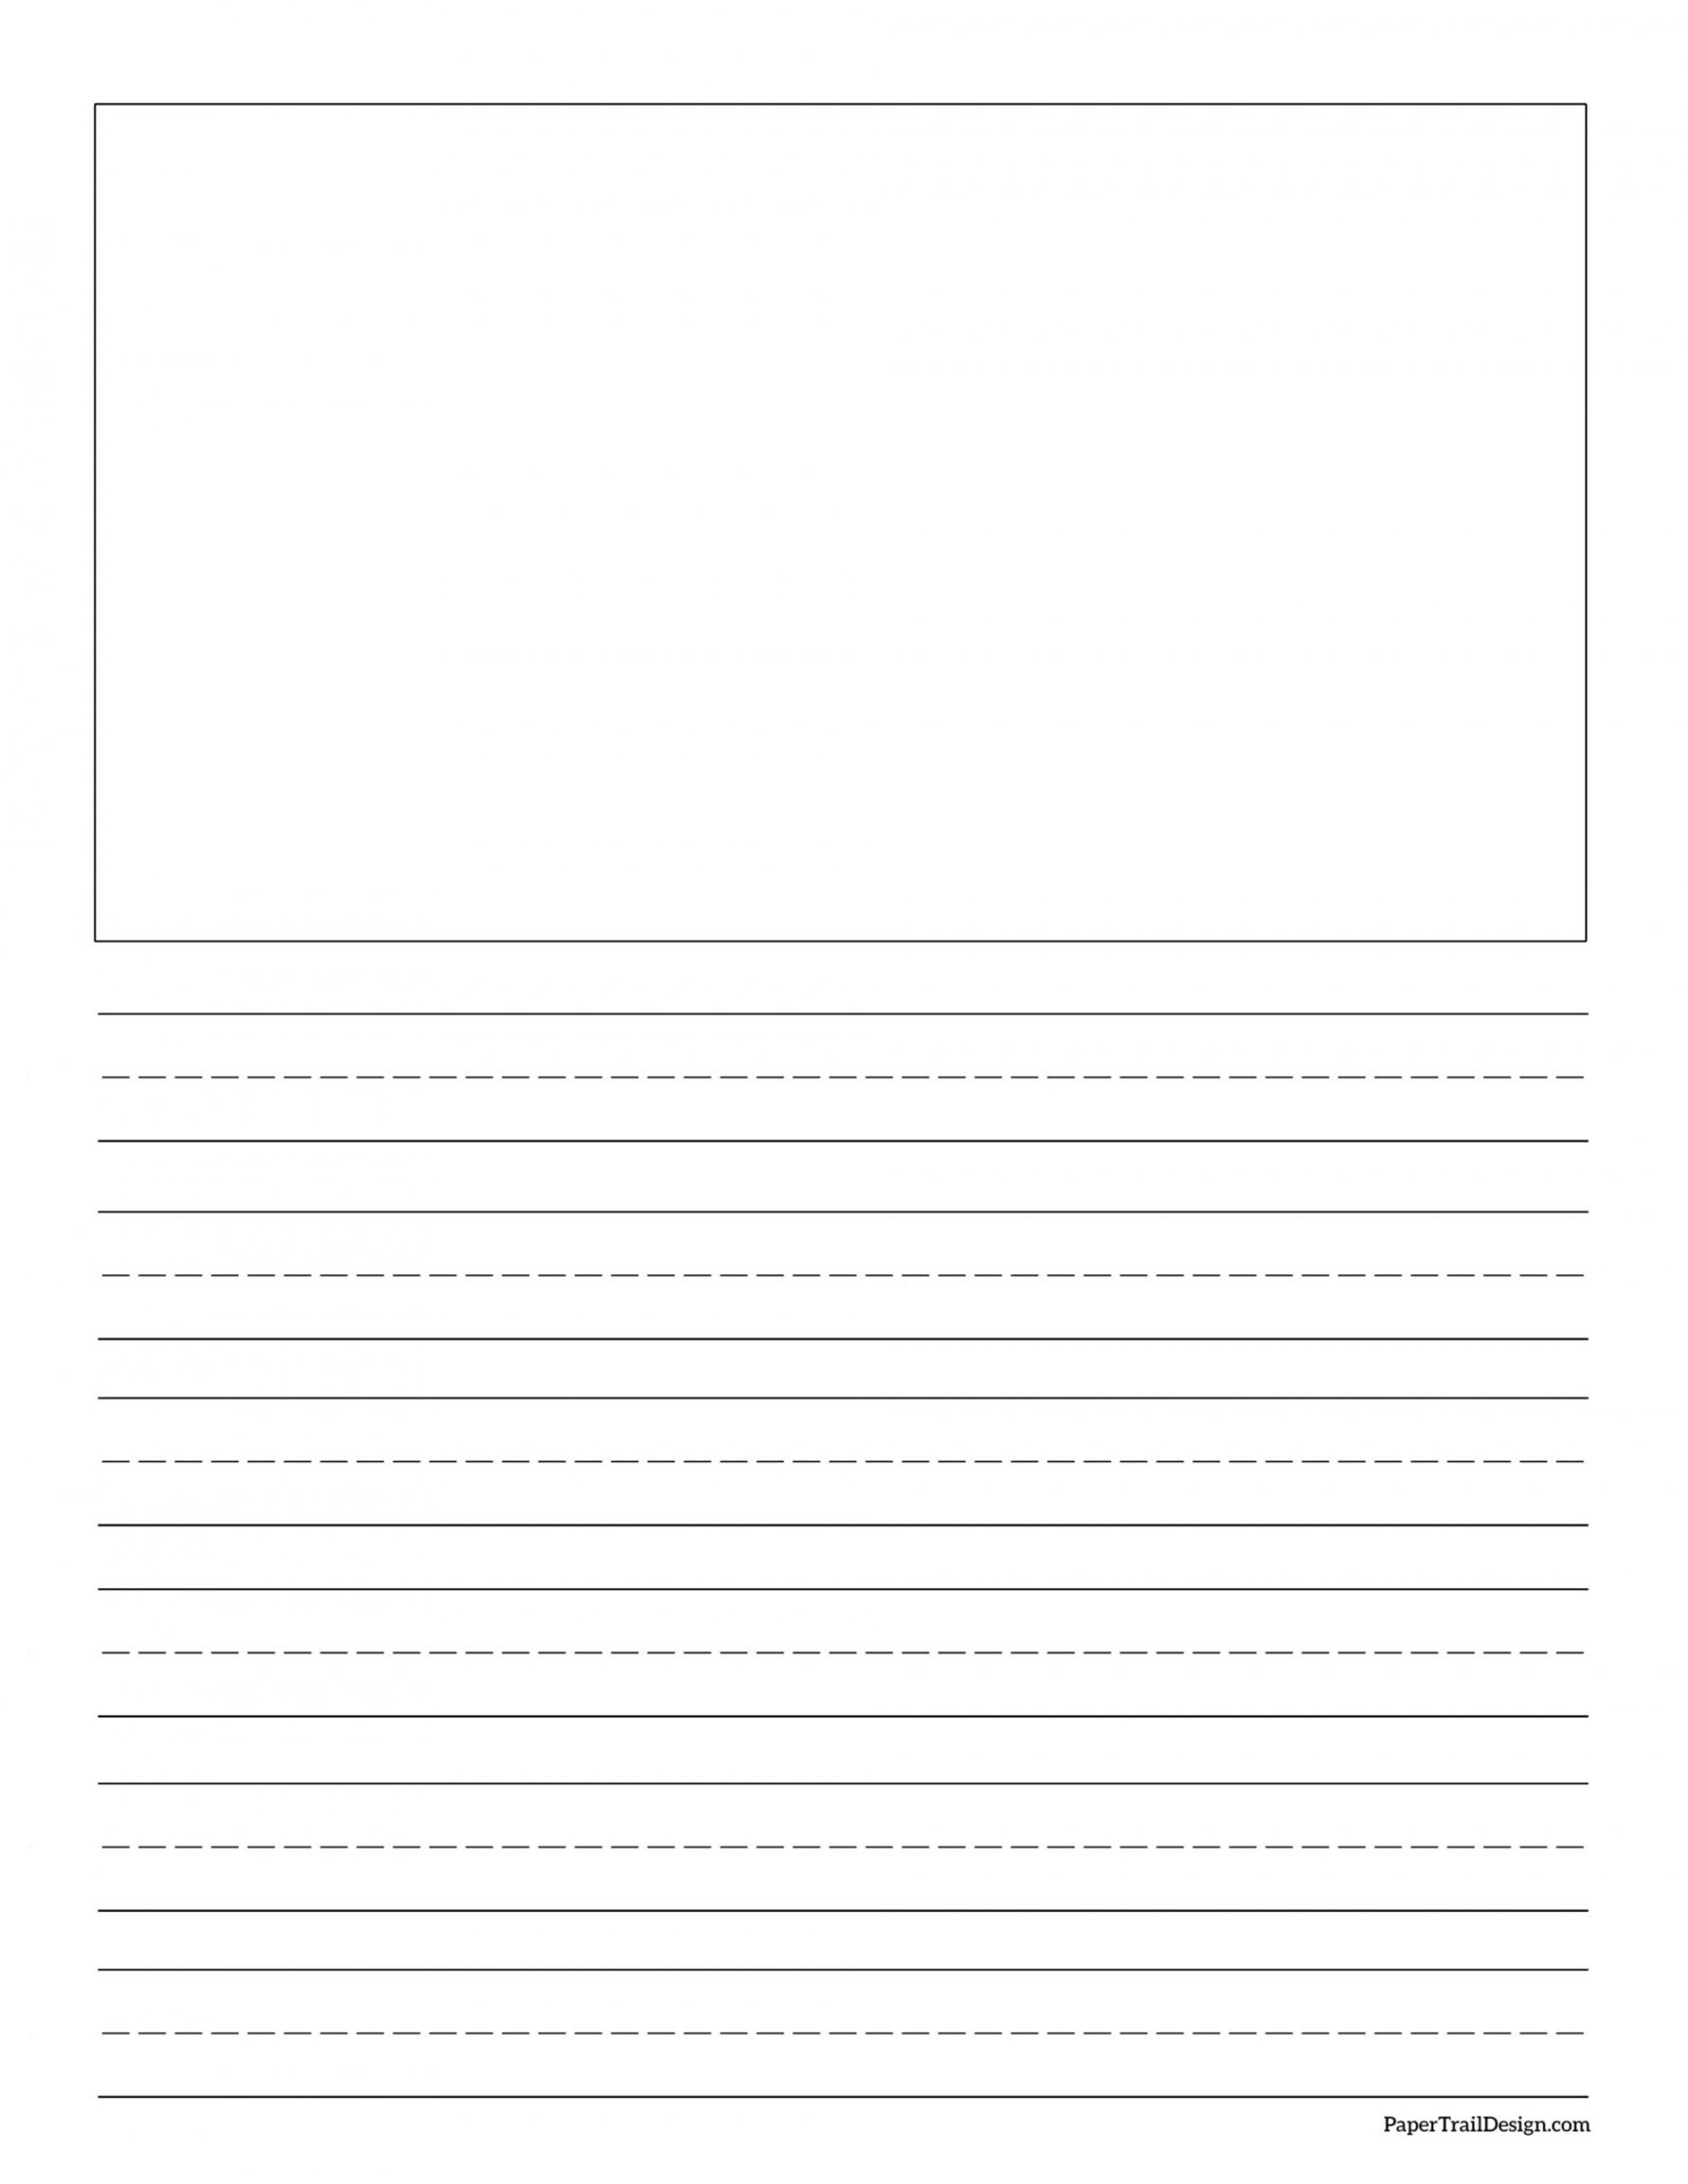 Free Printable Lined Writing Paper with Drawing Box - Paper Trail  - FREE Printables - Writing Paper With Picture Box